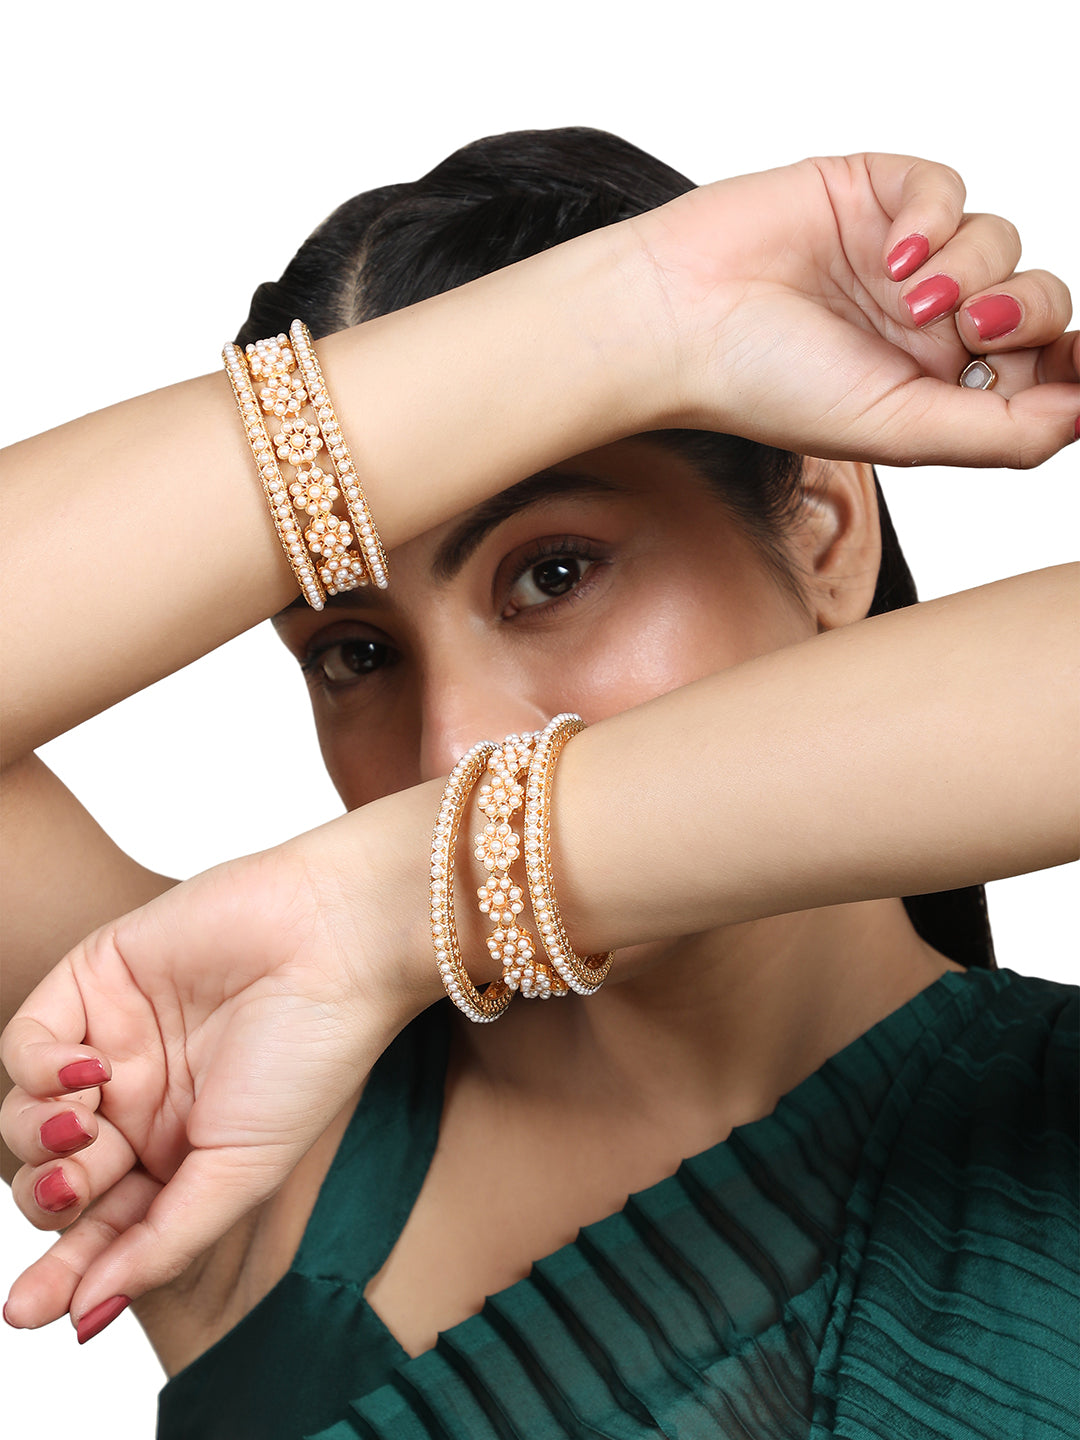 Women's/Girls Ethnic Gold Plated Floral Shaped Pearl Studded Bangle Set Of 4 - Mode Mania